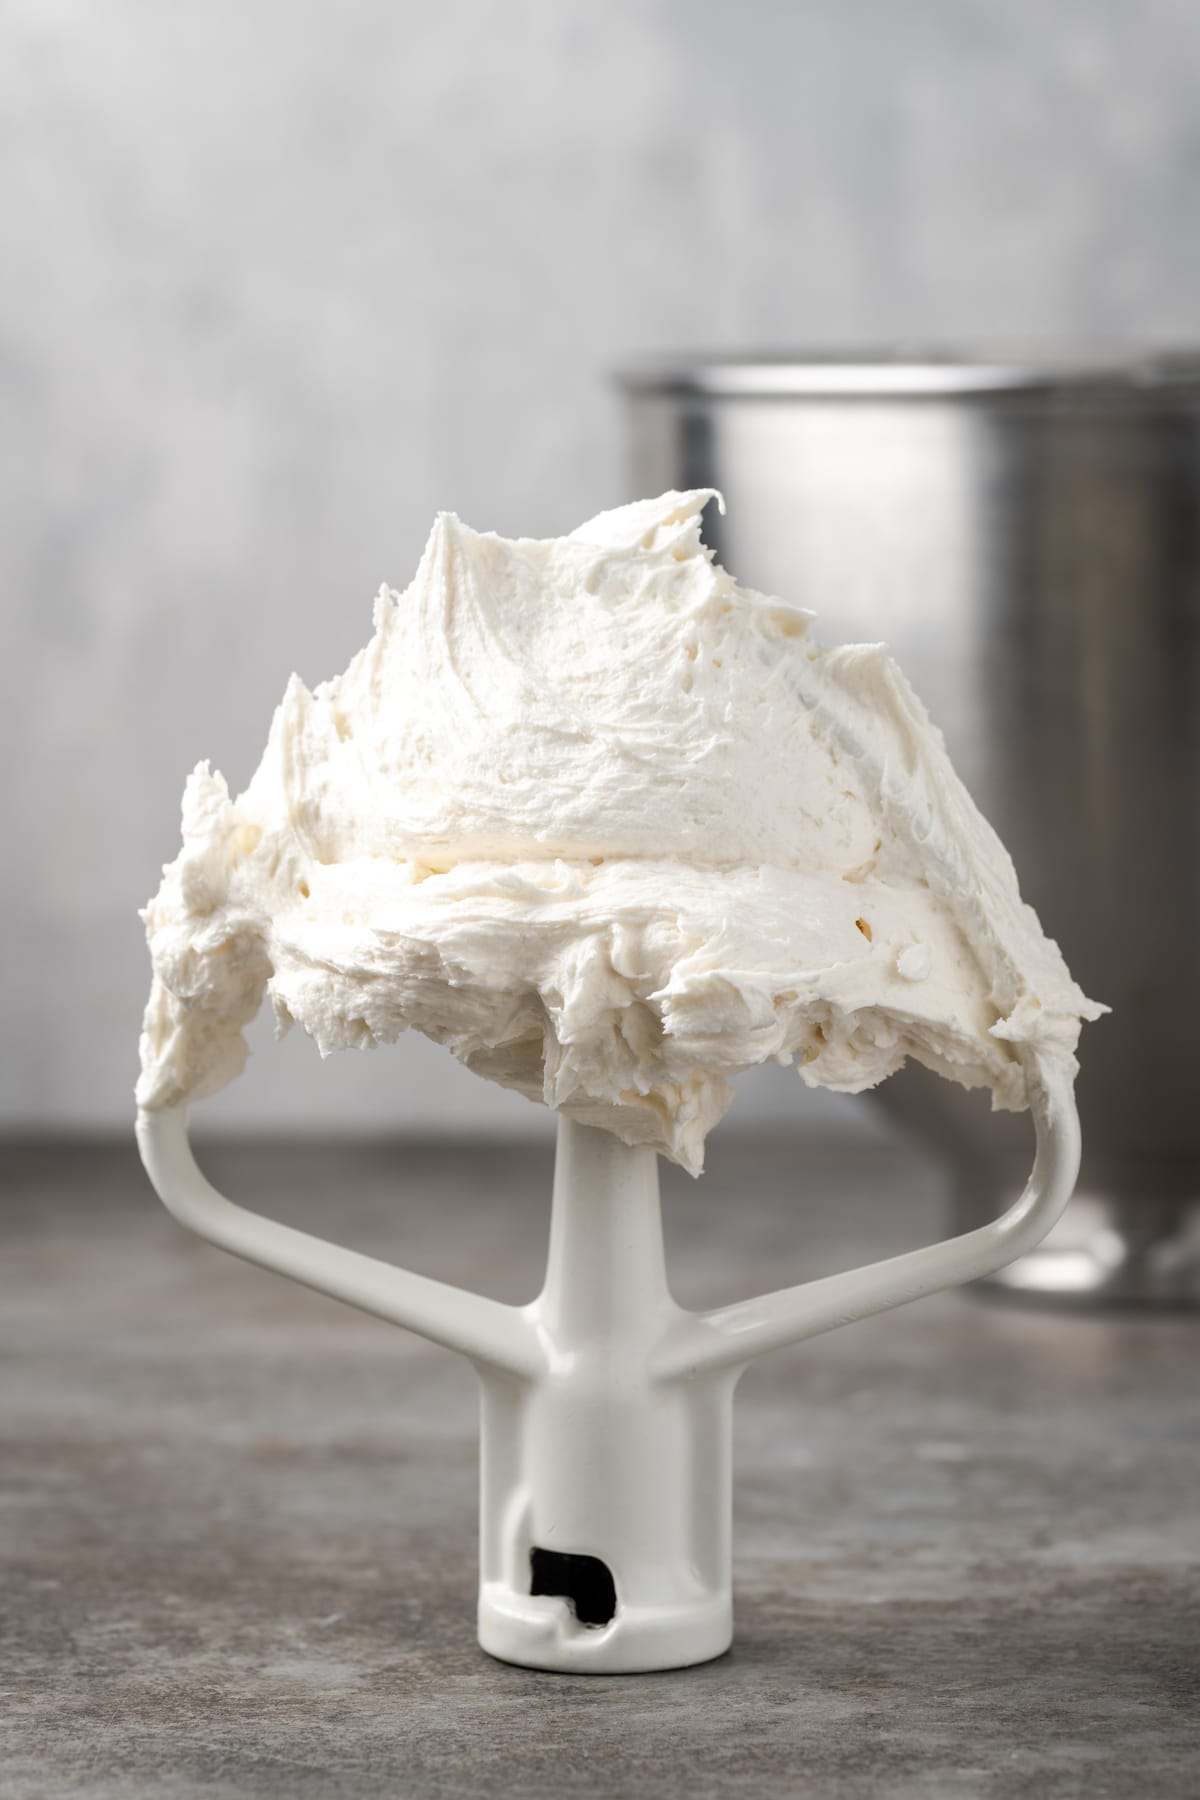 Vanilla buttercream frosting on a stand mixer attachment, propped upright on a countertop.